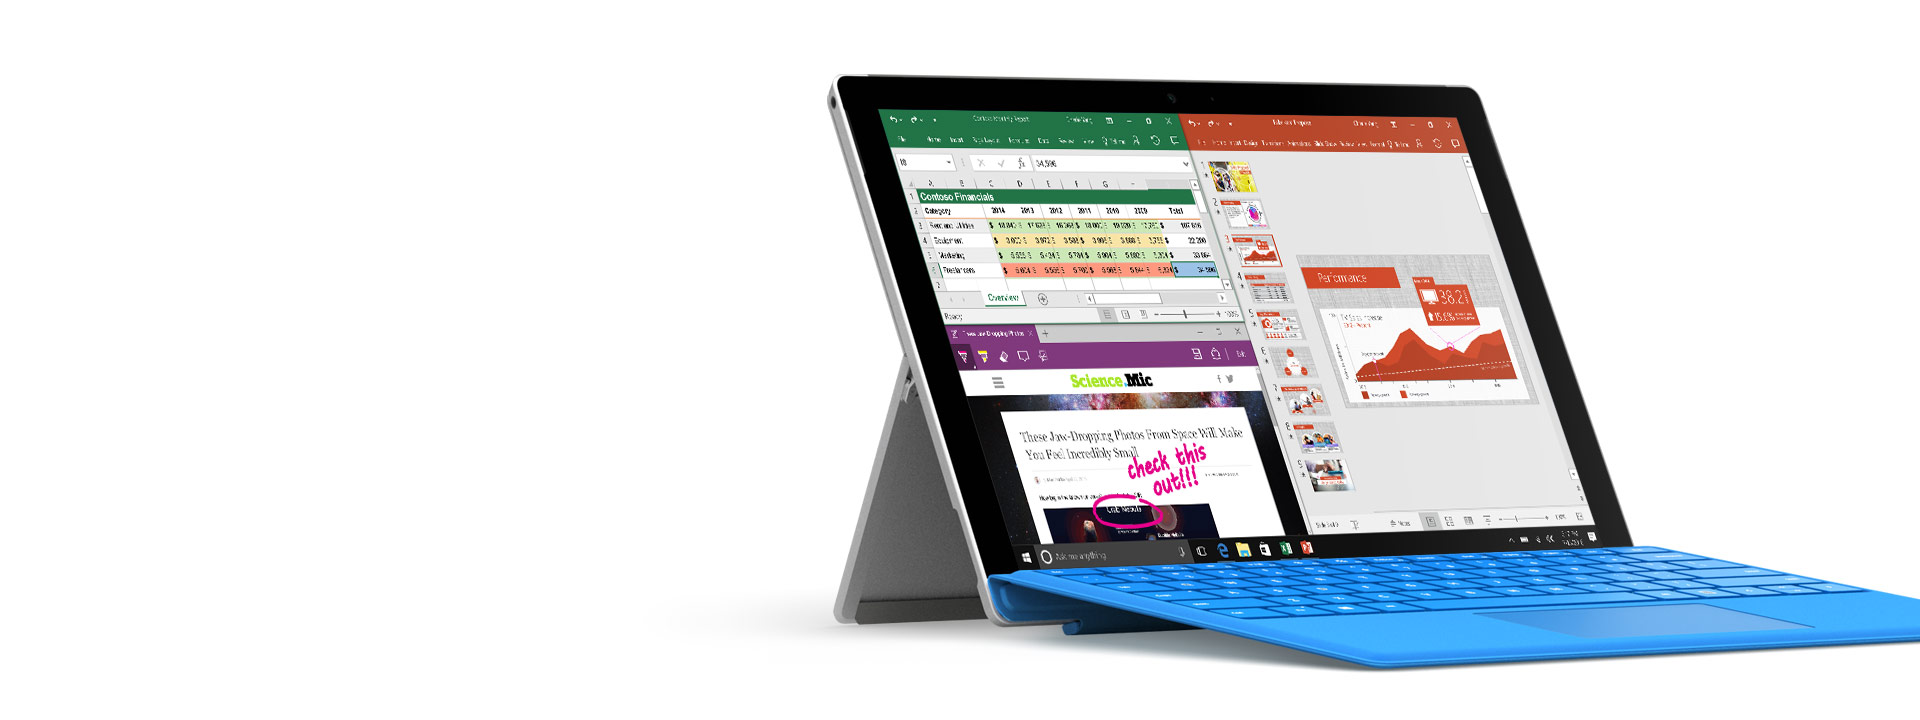 Surface Pro 4 with Office applications open on screen displaying inking capability